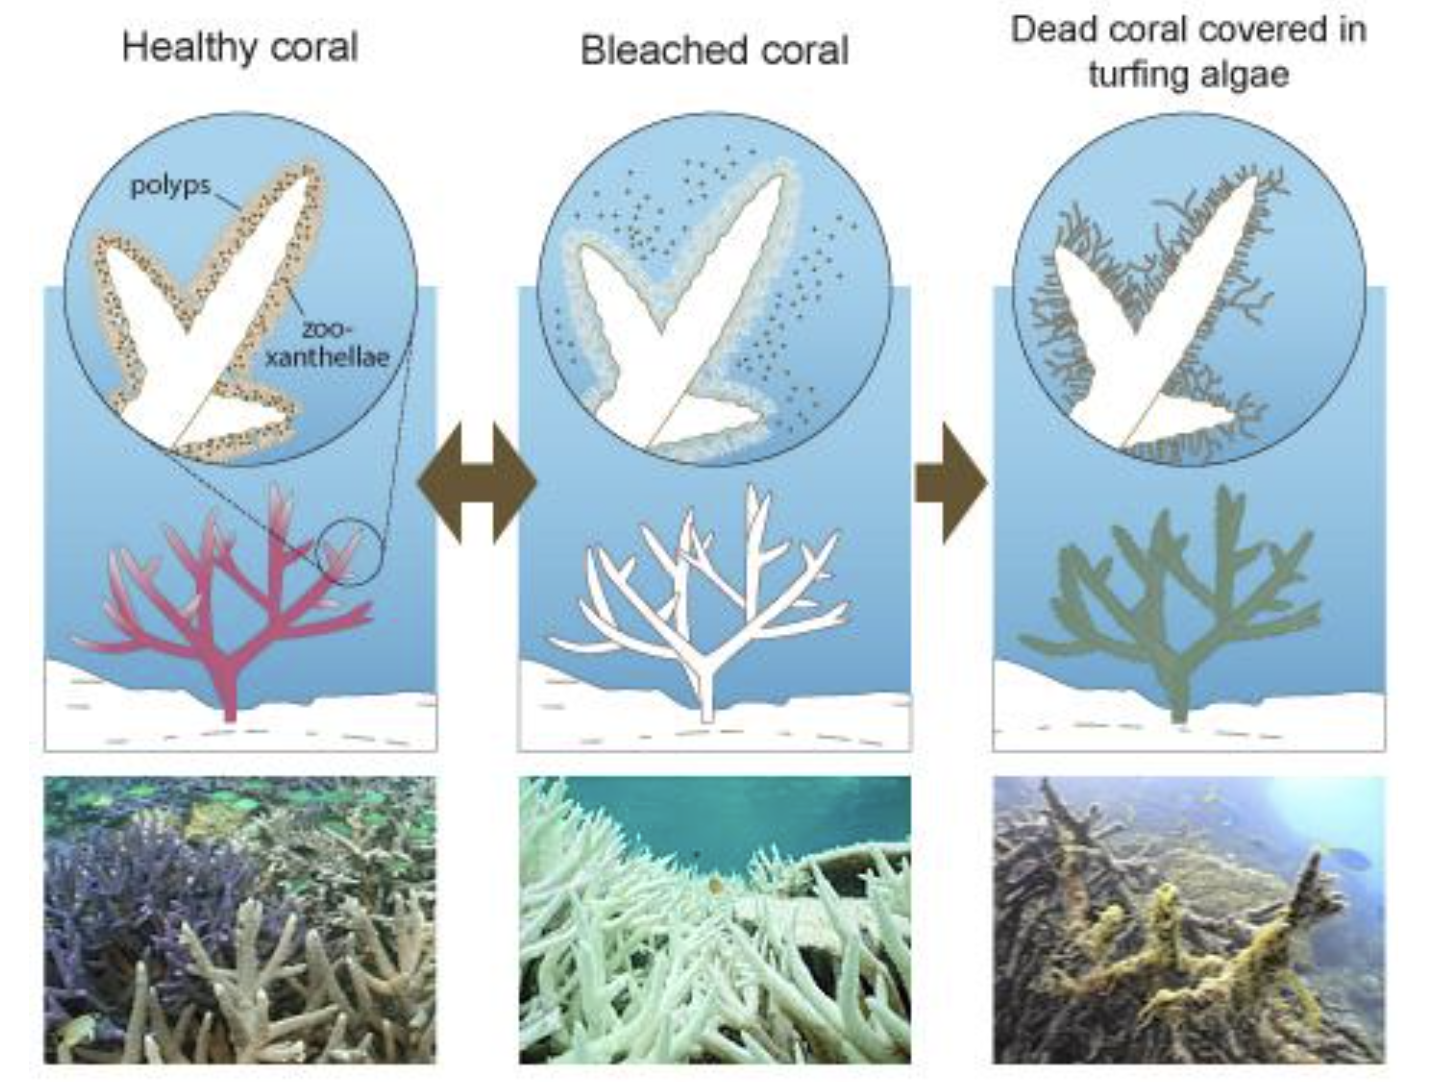 <p><span>Corals have a mutualistic relationship with zooxanthellae, a type of algae</span></p><p><span>The zooxanthellae provide nutrients to the coral, and the coral provide a habitat for the zooxanthellae</span></p><p><span>When the coral get stressed, they eject the zooxanthellae. While some corals are able to recover, many do not.</span></p>